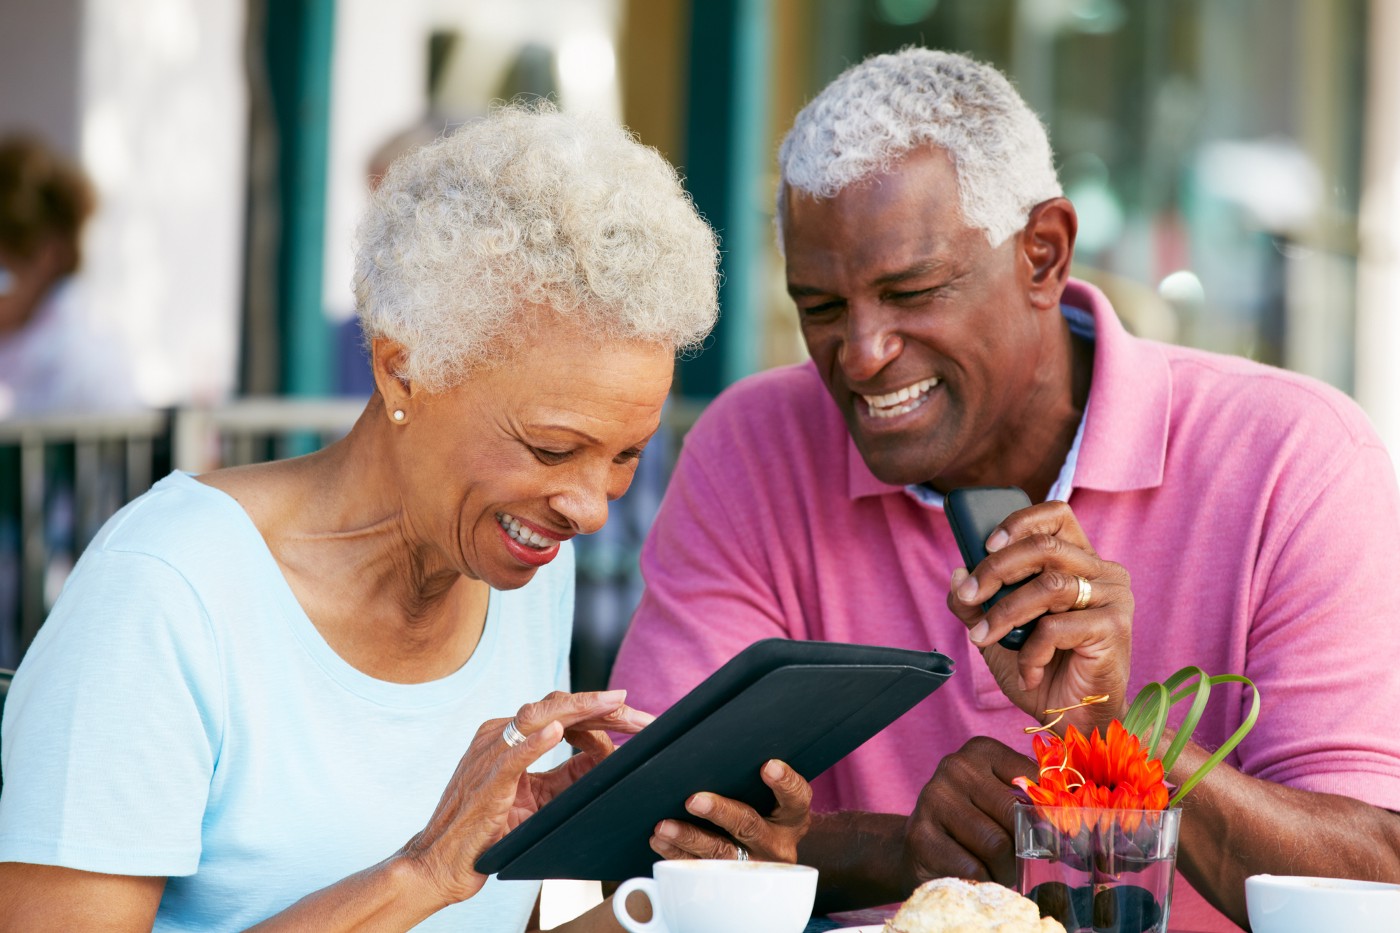 The benefits of technology for seniors